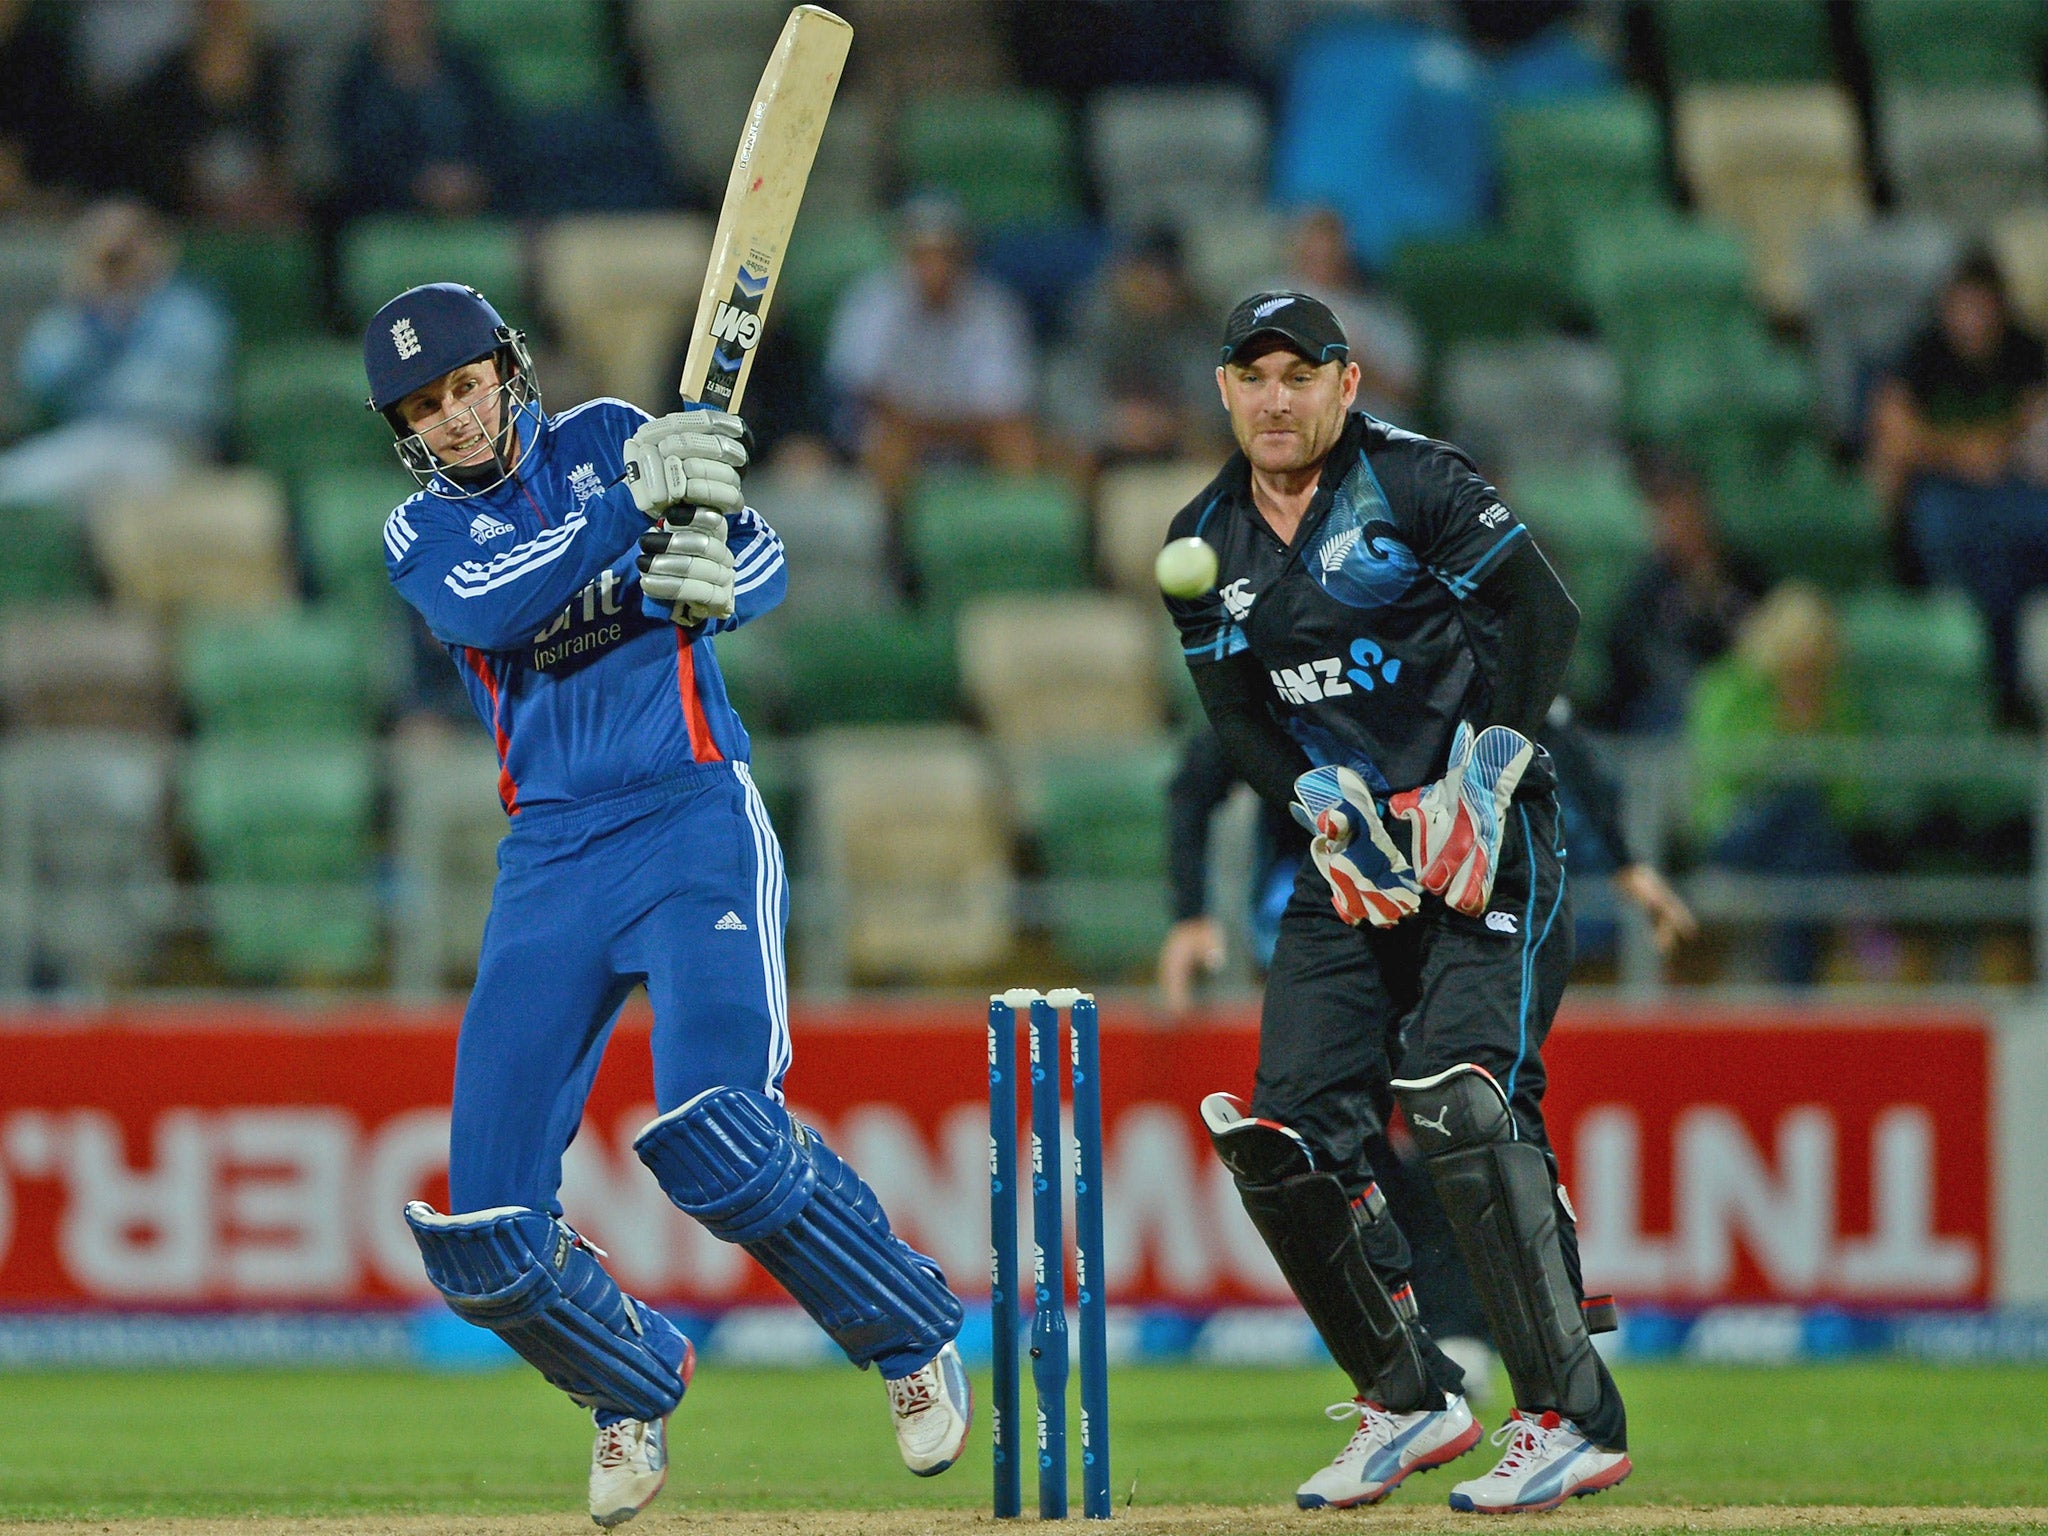 Joe Root hits out on his way to an unbeaten 79 in Napier